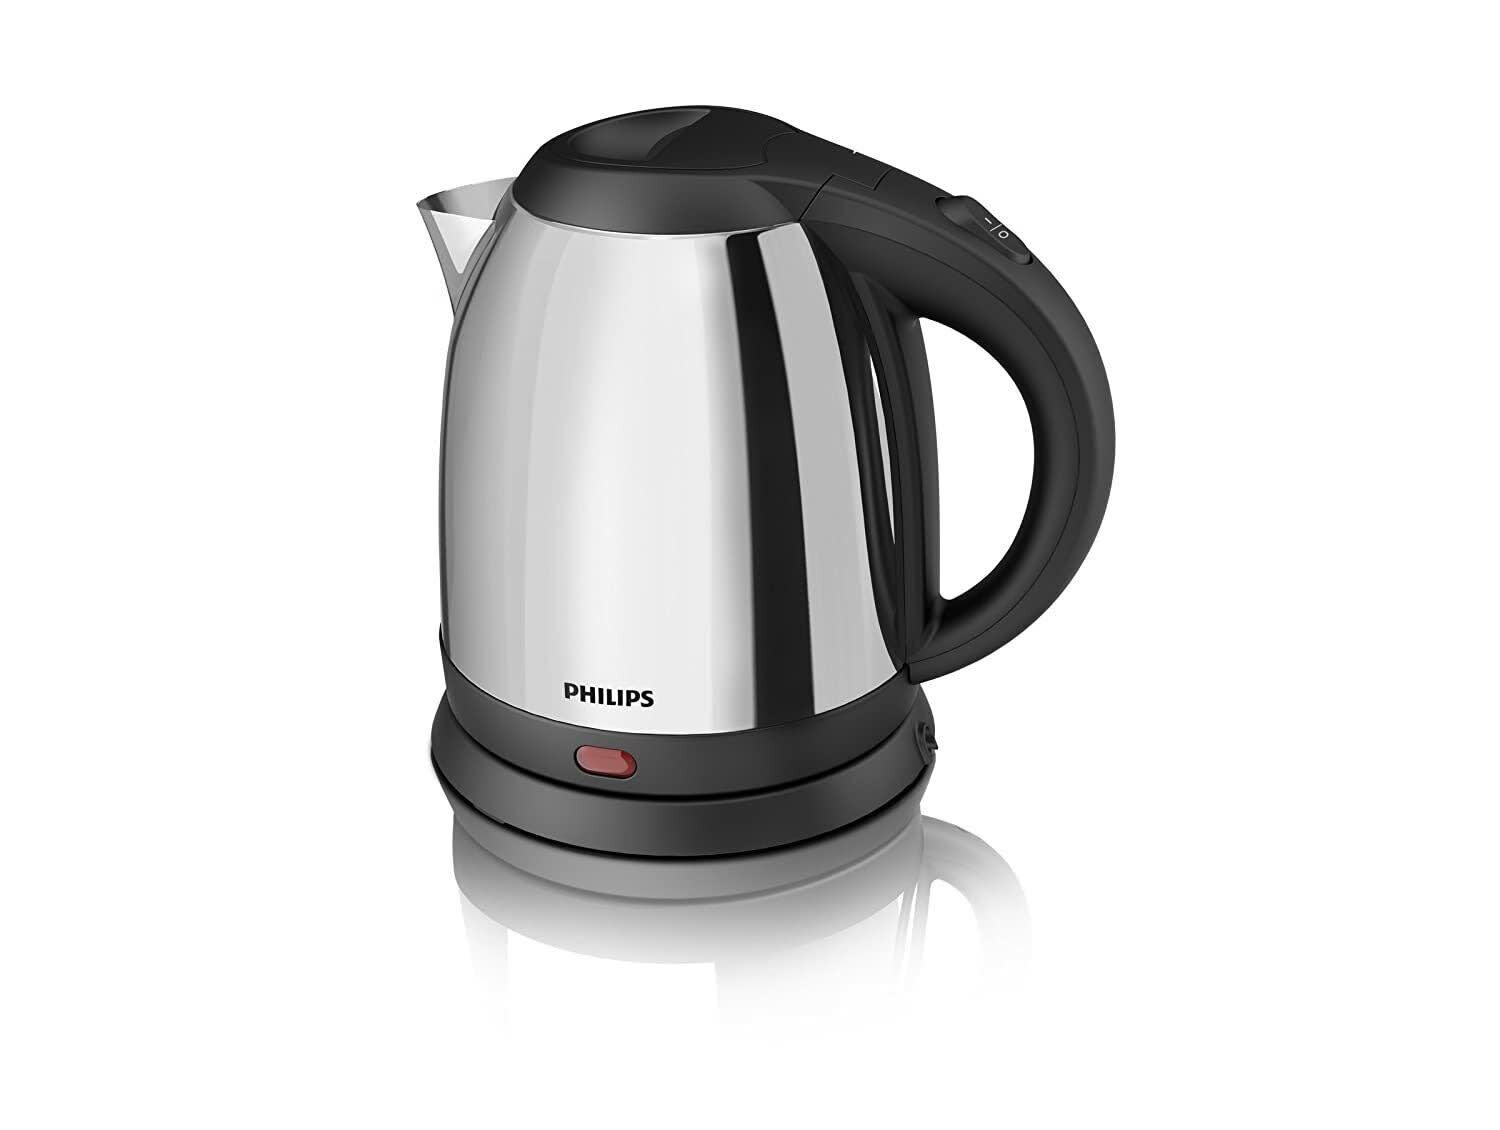 Philips Stainless Steel Body Jug Kettle